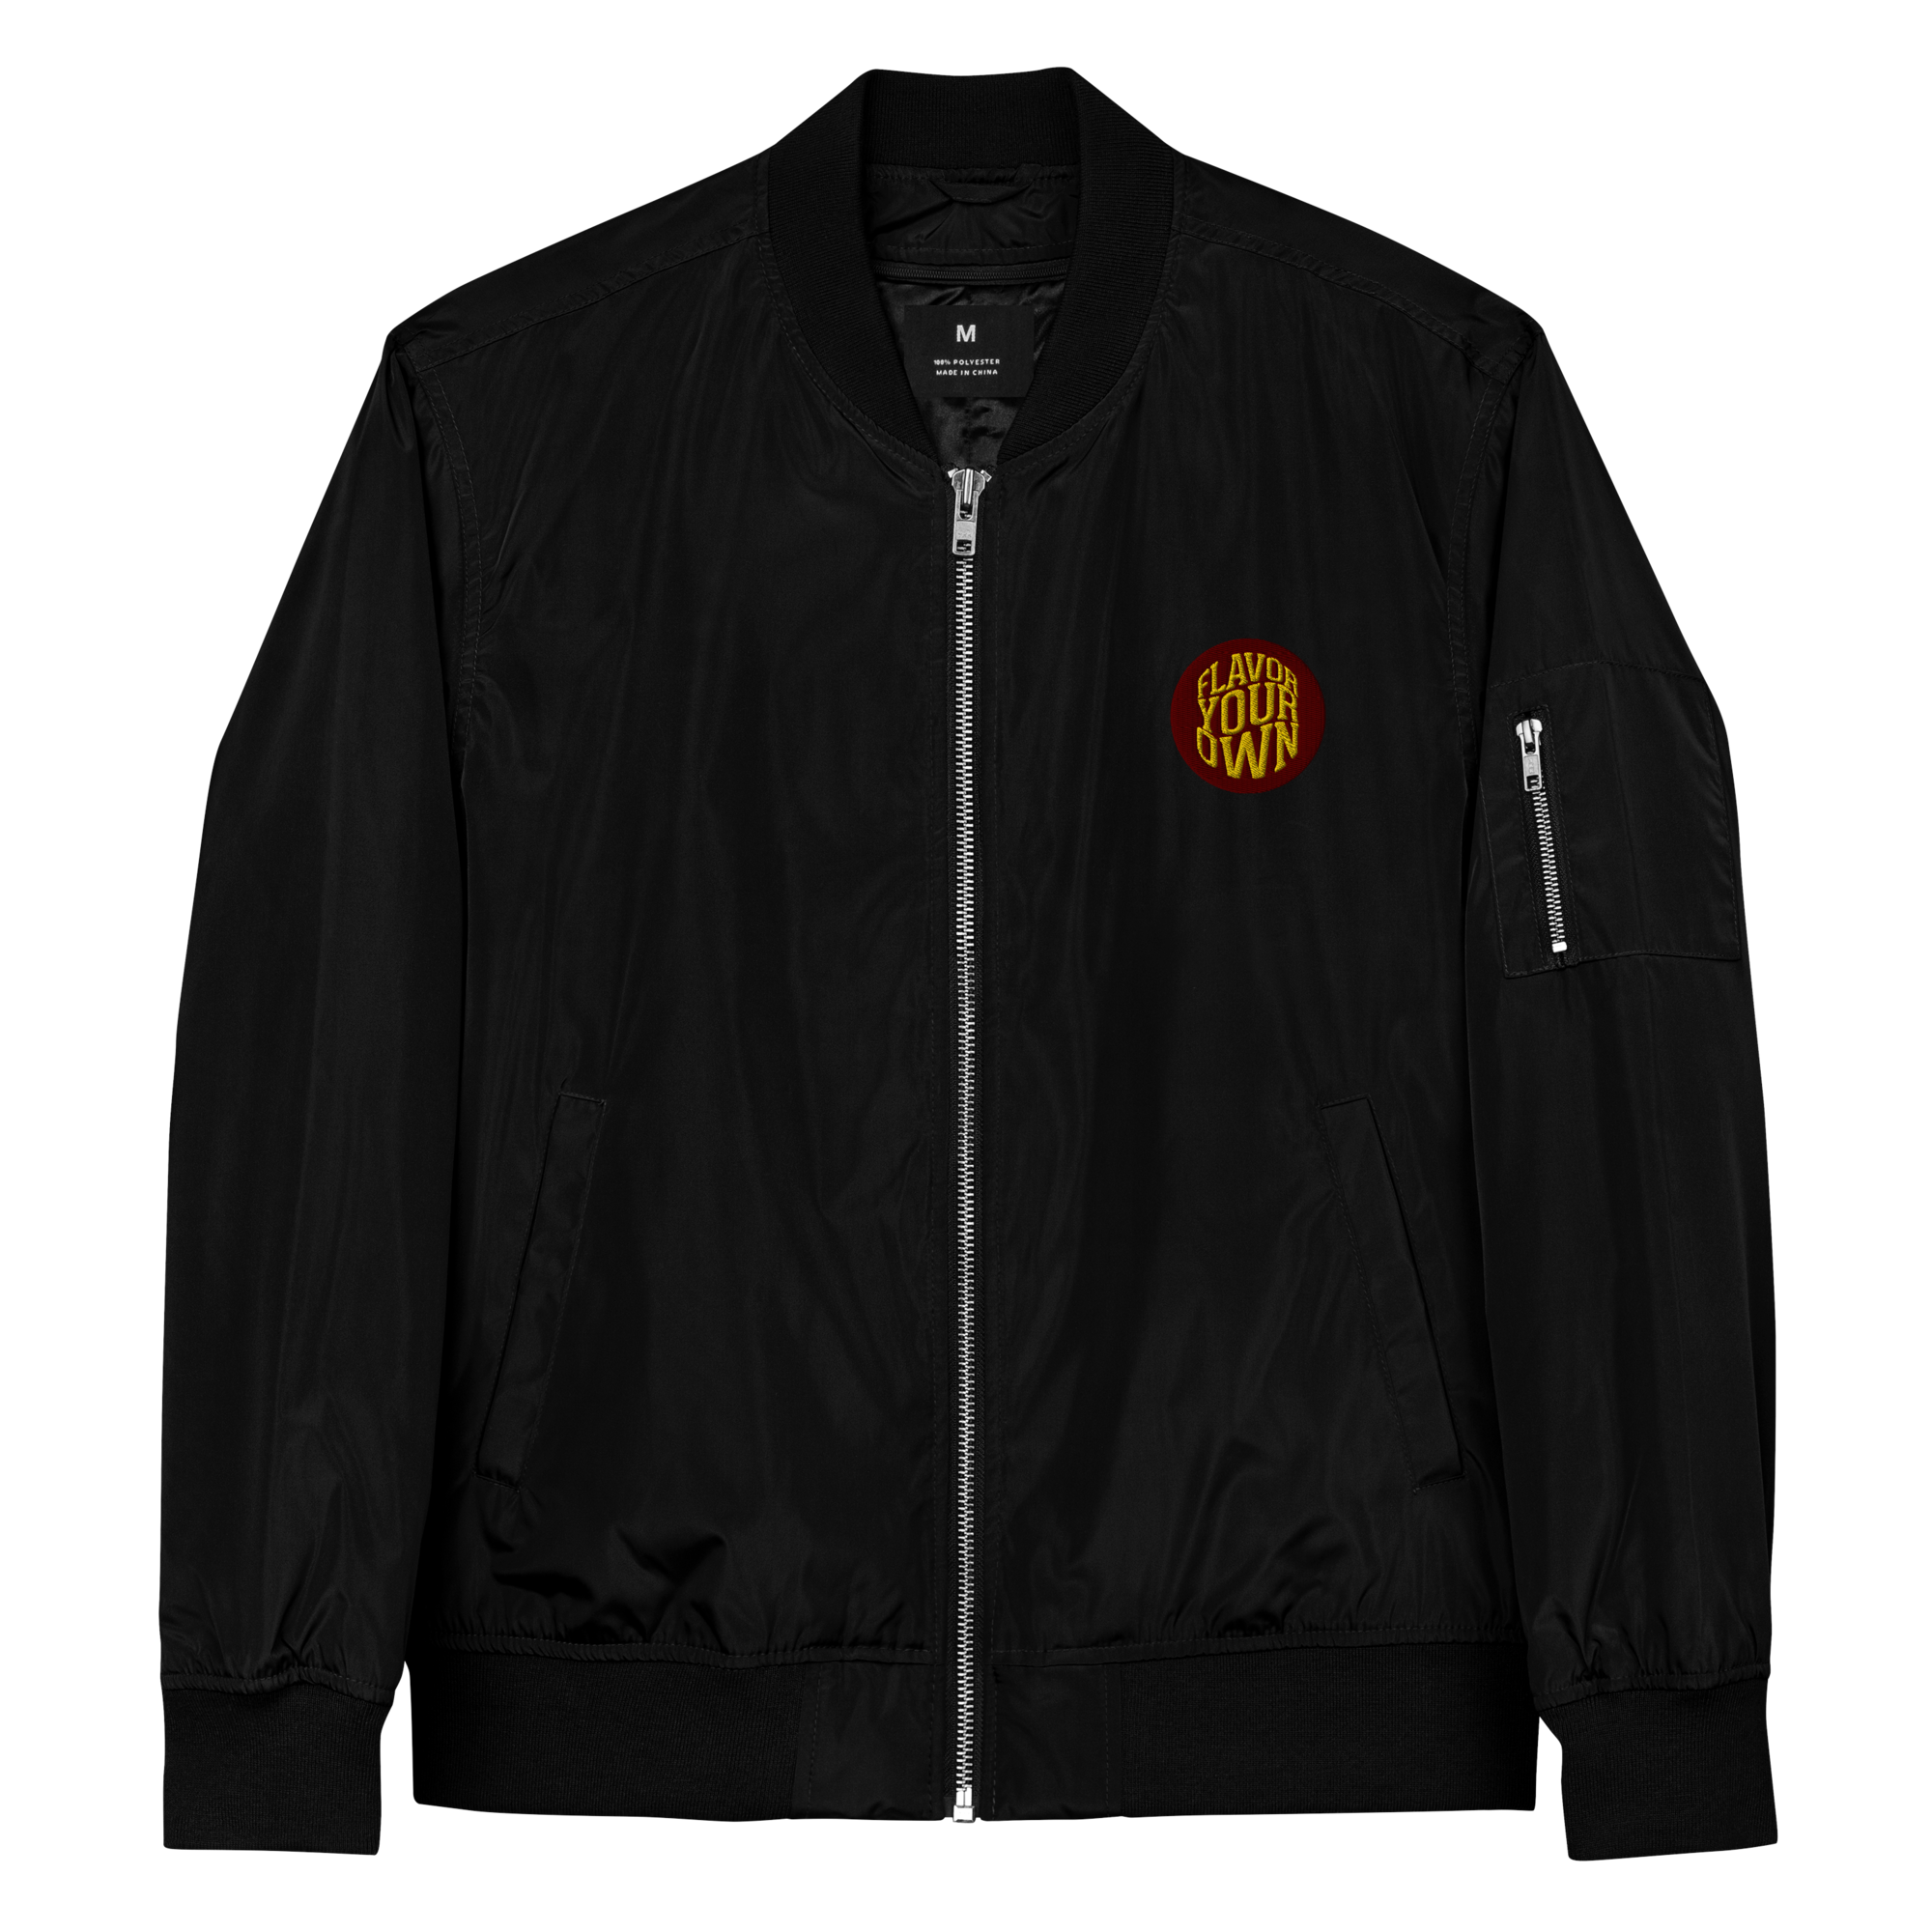 Flavor Your Own I bomber jacket